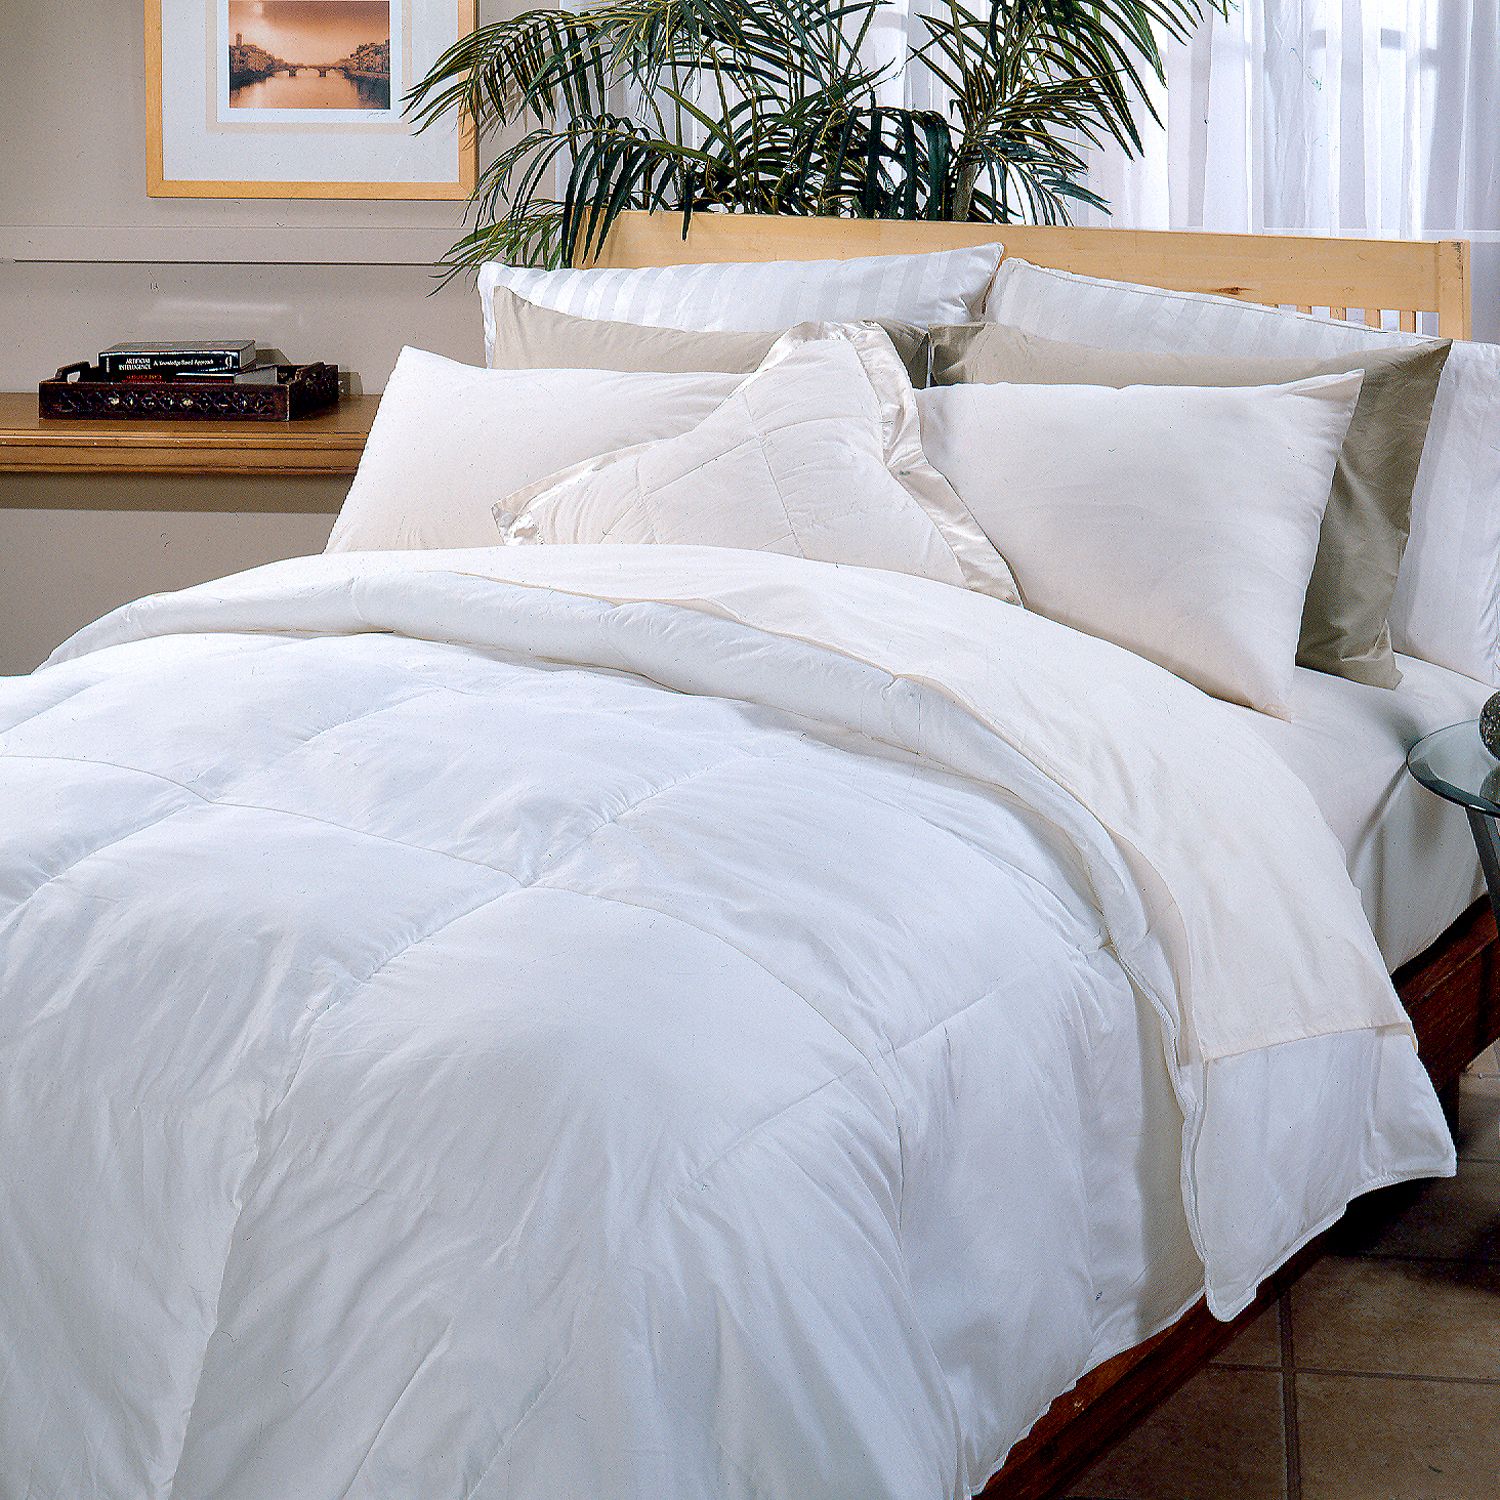 Premium Hungarian White Goose Down Comforter with 700 TC Cotton Cover